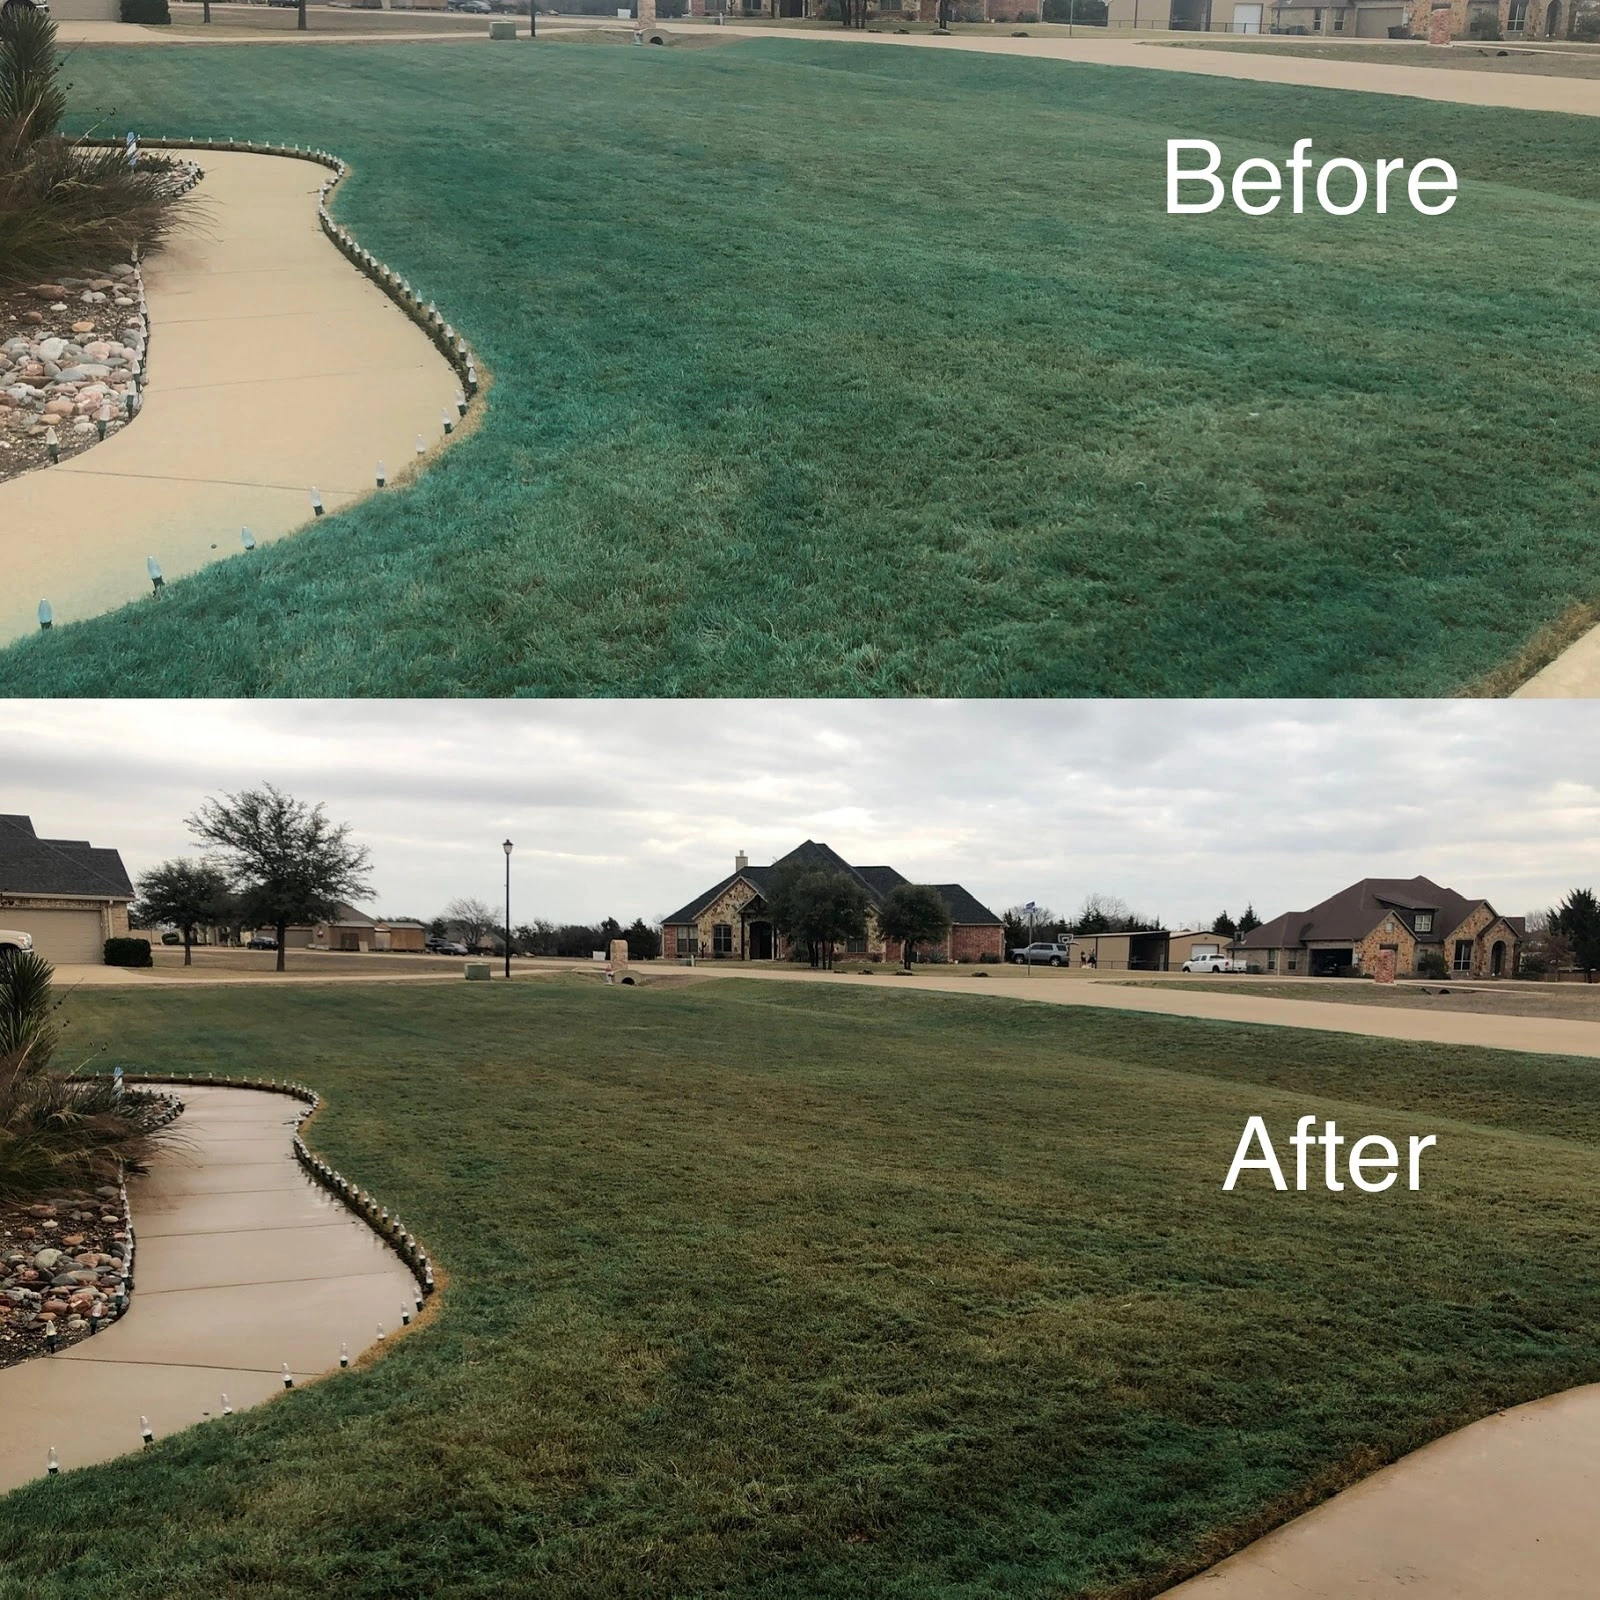 North Dallas Lawn Care: The Advantages of Using Blue Dye in Weed Control